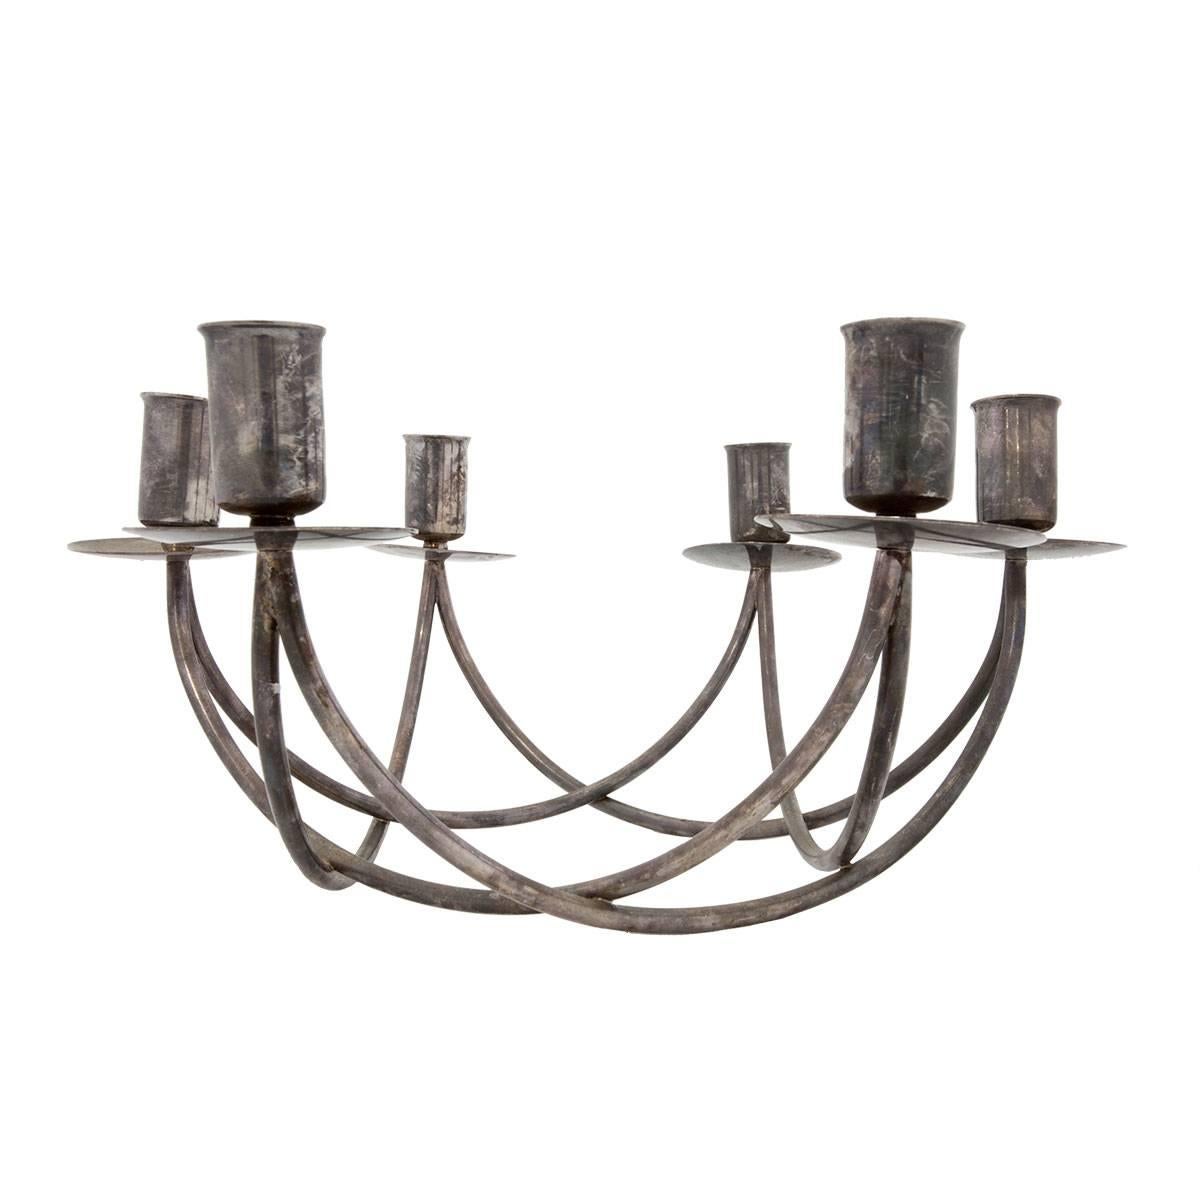 Rare Candelabra Sculpture Mid Century Danish Design - Gray Abstract Sculpture by Einar Dragsted